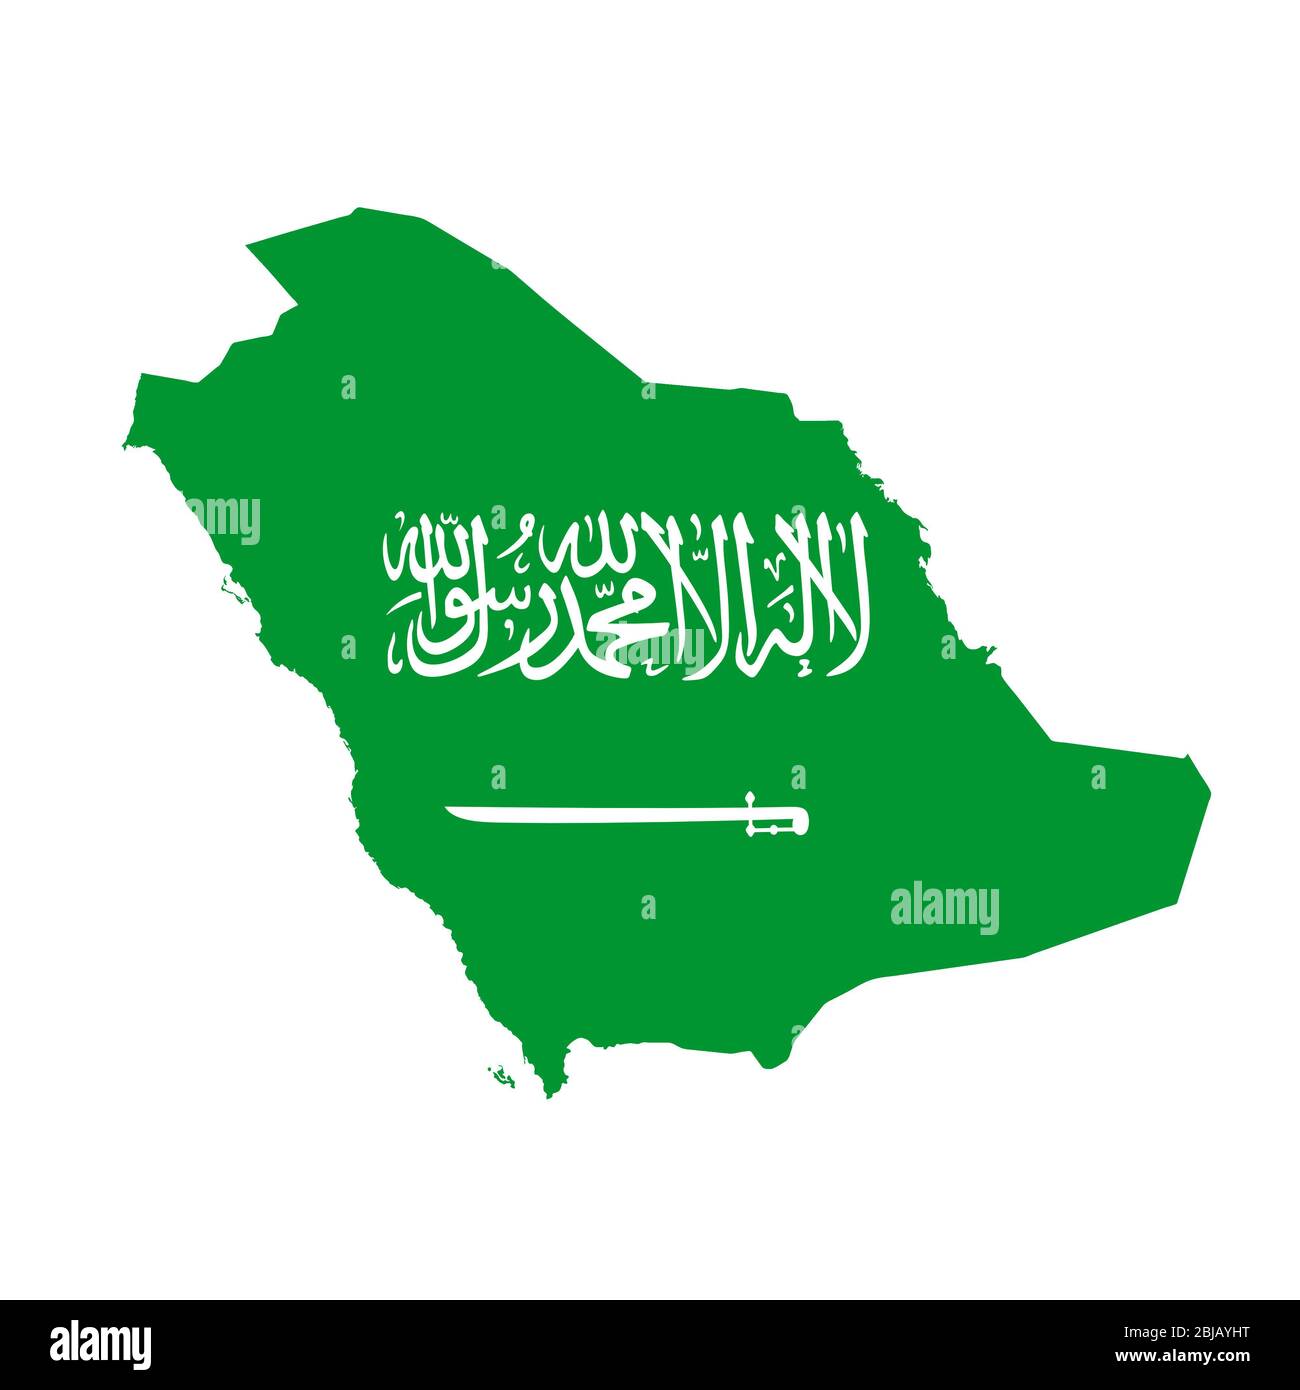 Saudi Arabia flag map. Country outline with national flag Stock Photo